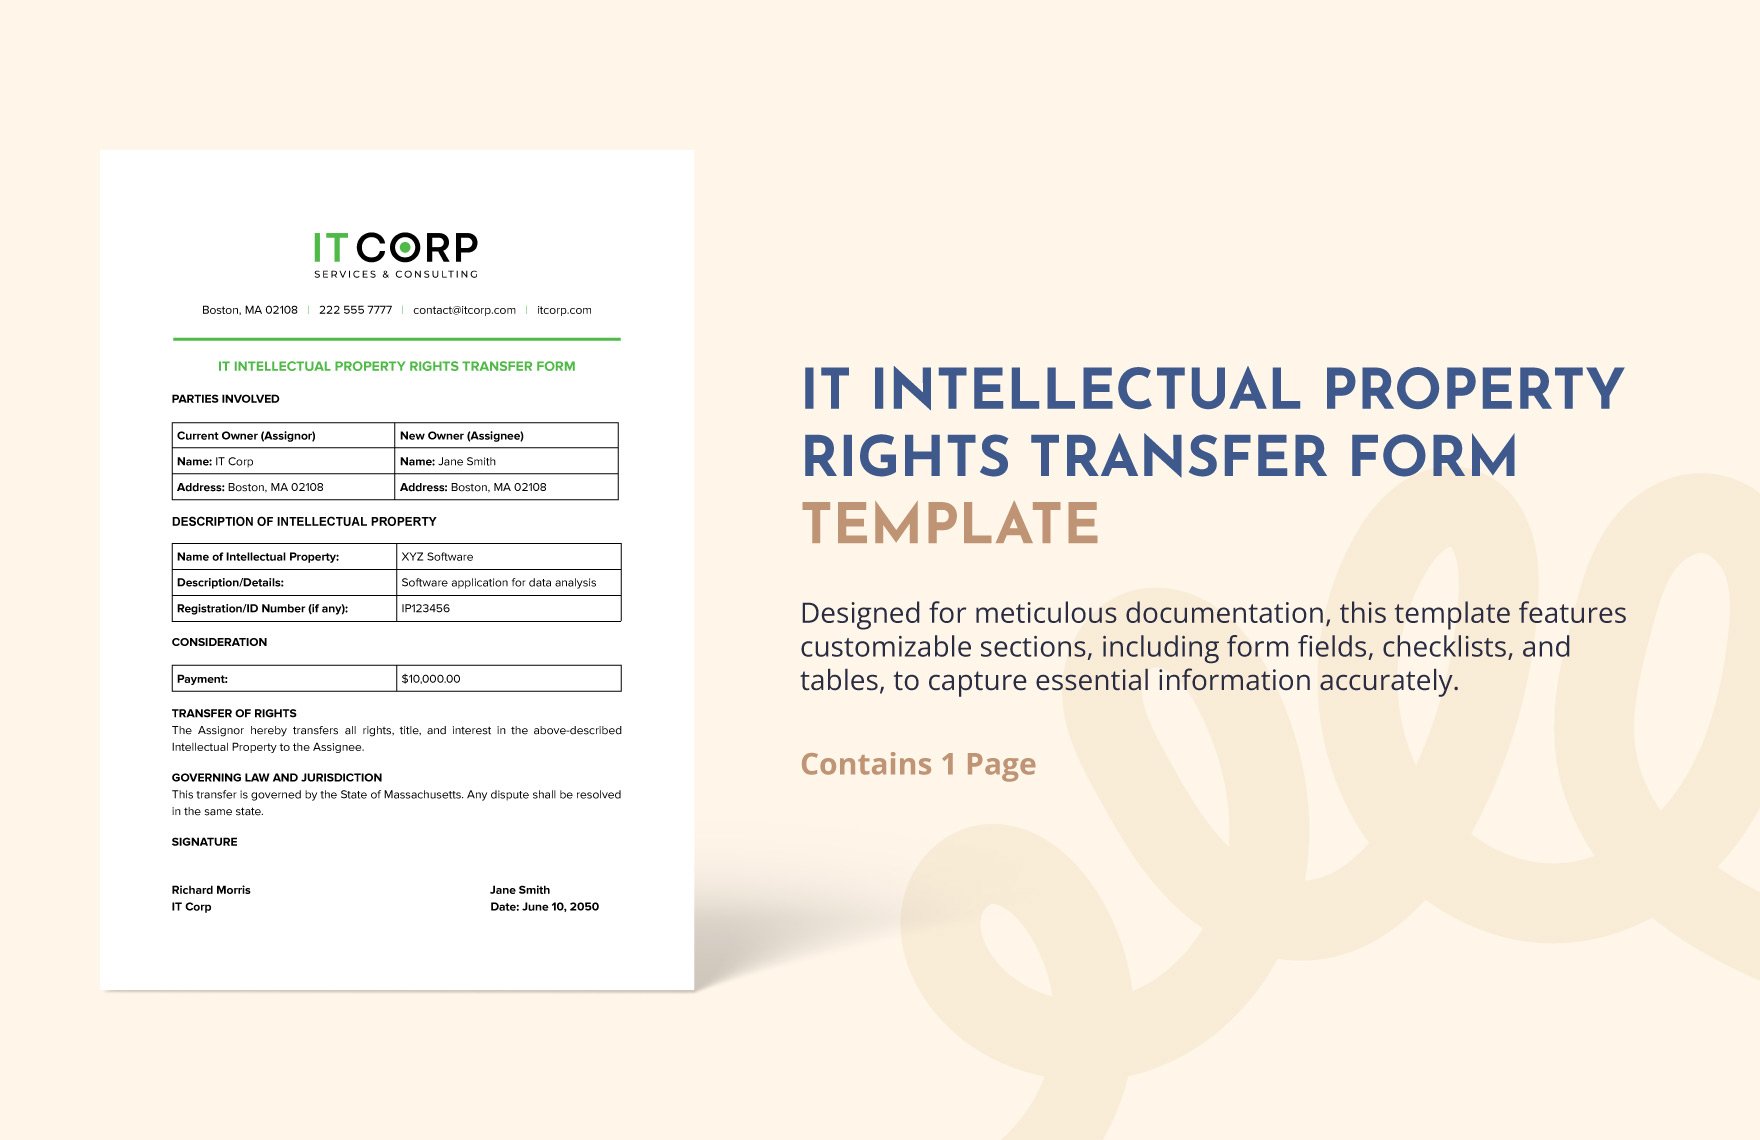 IT Intellectual Property Rights Transfer Form Template